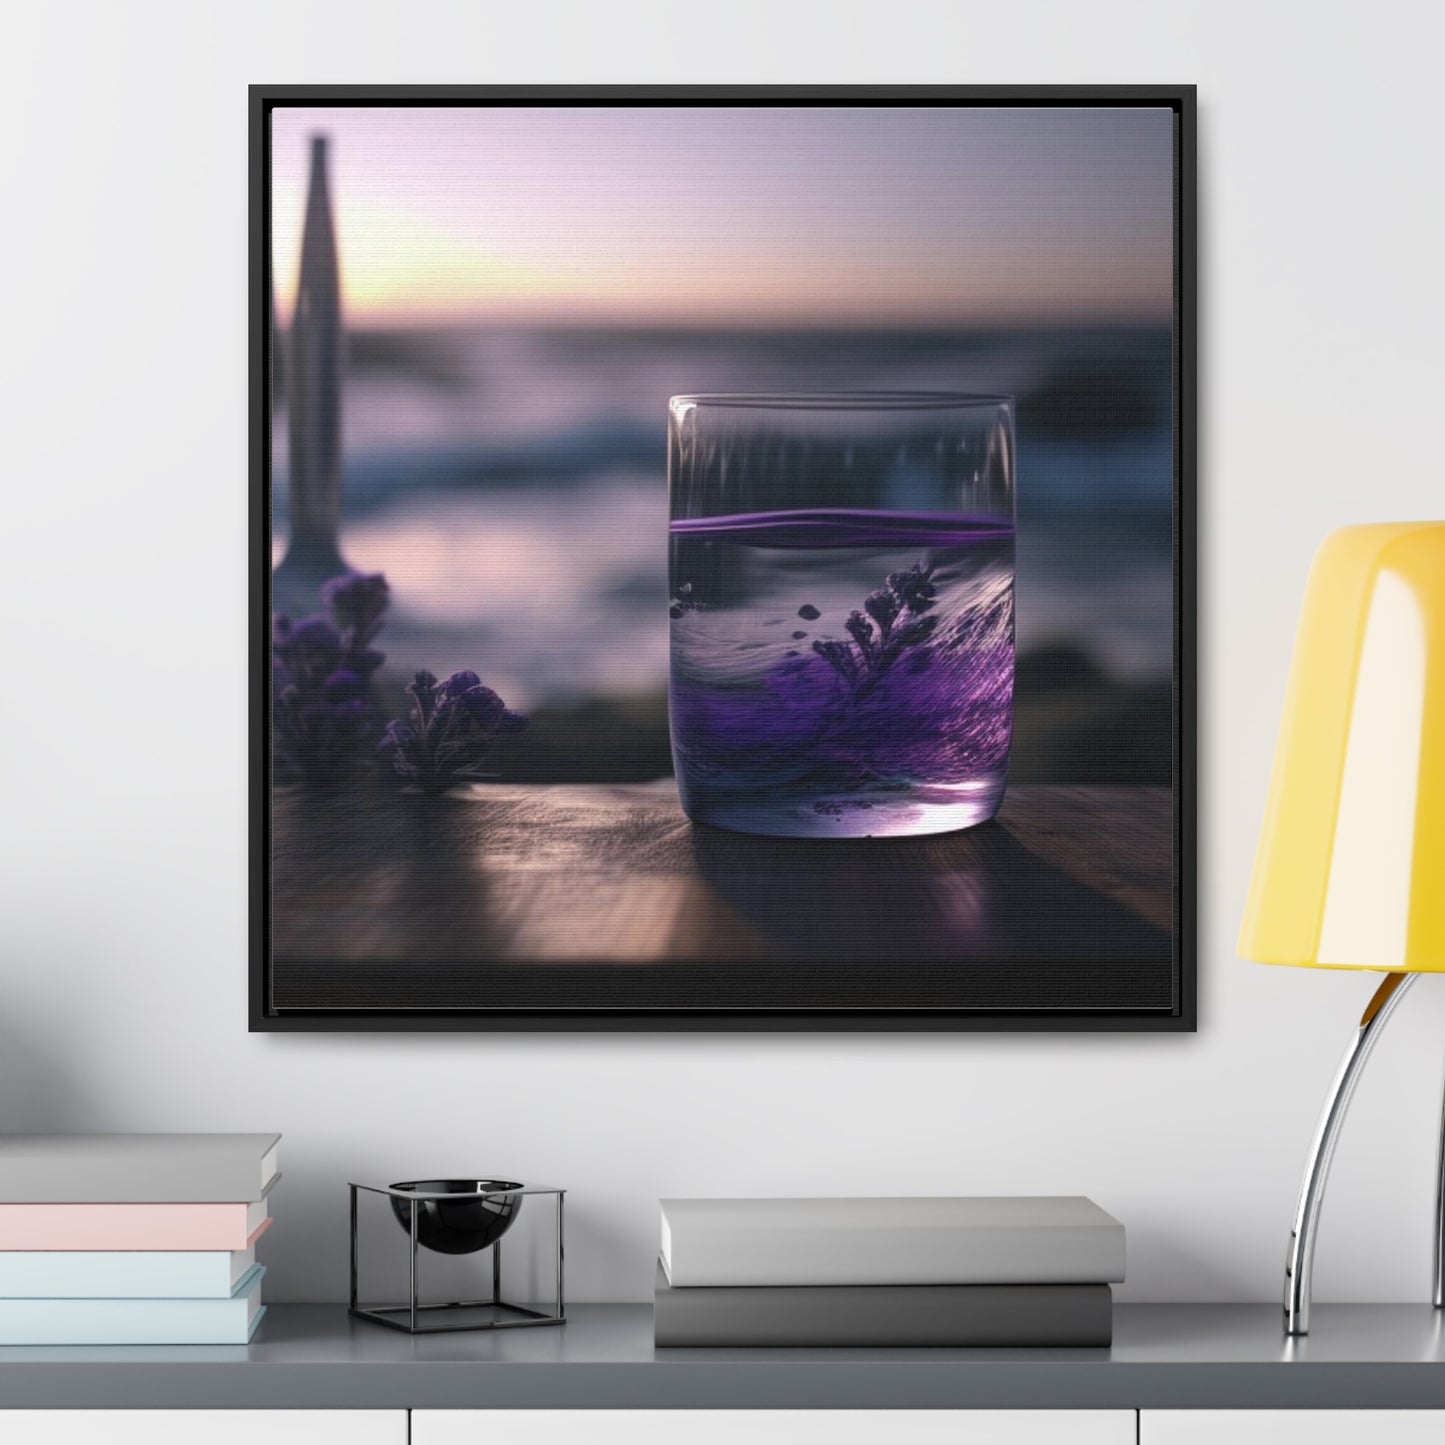 Gallery Canvas Wraps, Square Frame Lavender in a vase 4